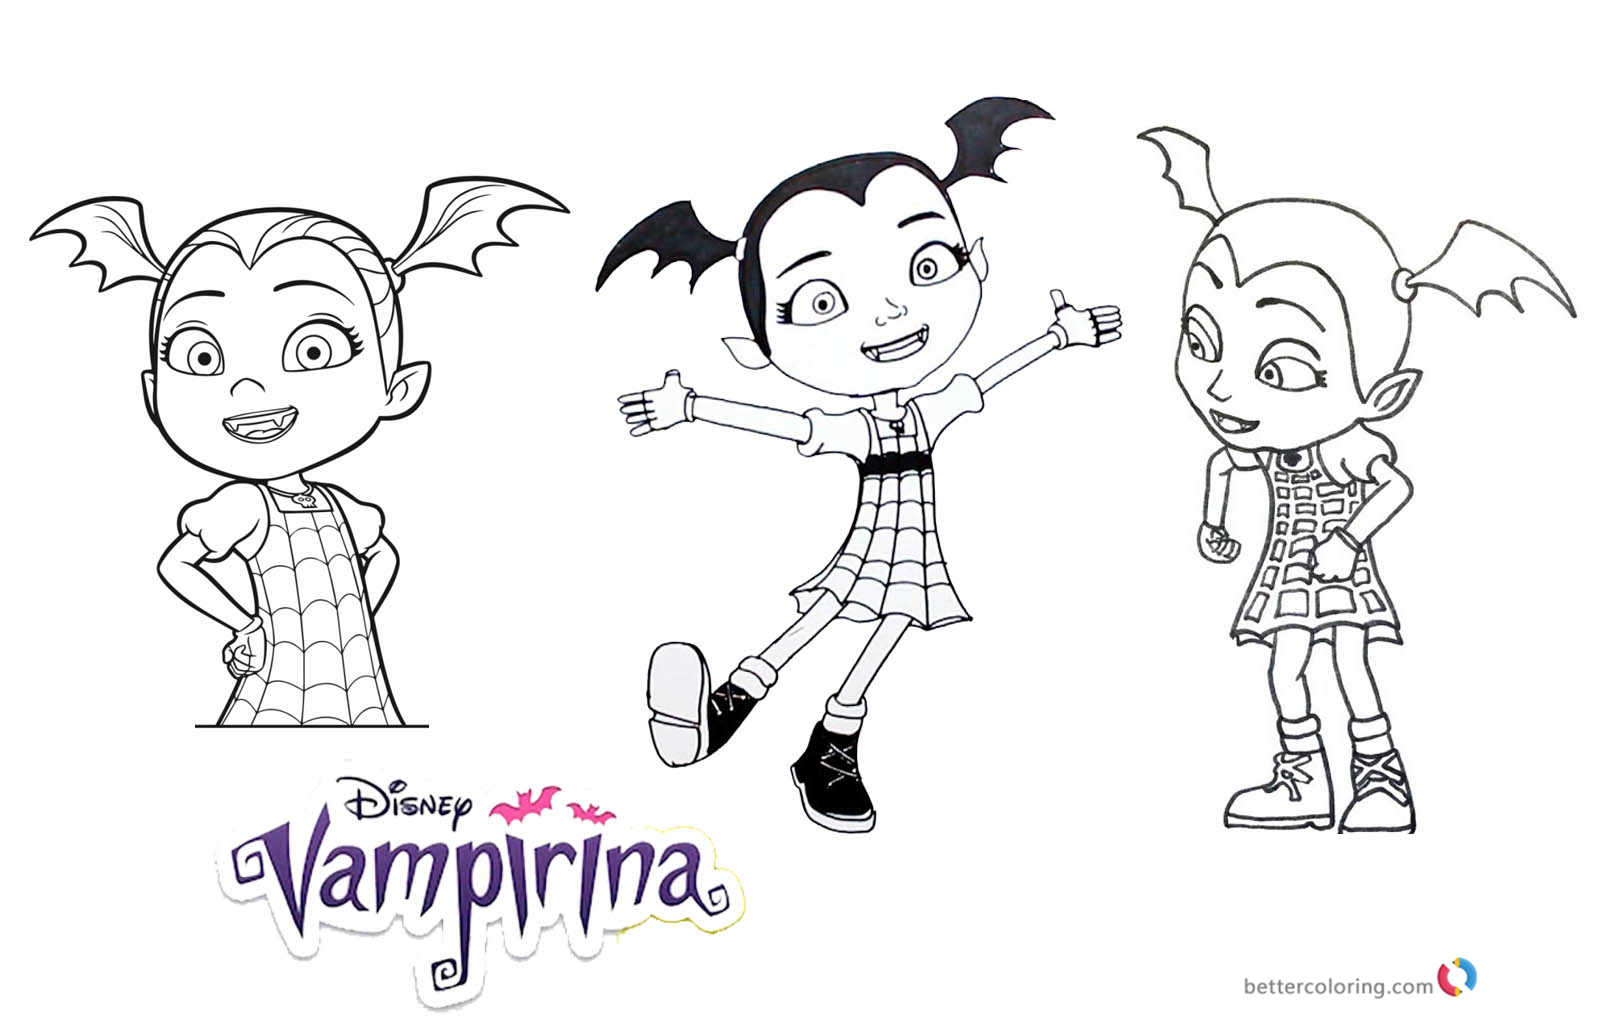 Download Vampirina coloring pages 3 in 1 - Free Printable Coloring ...